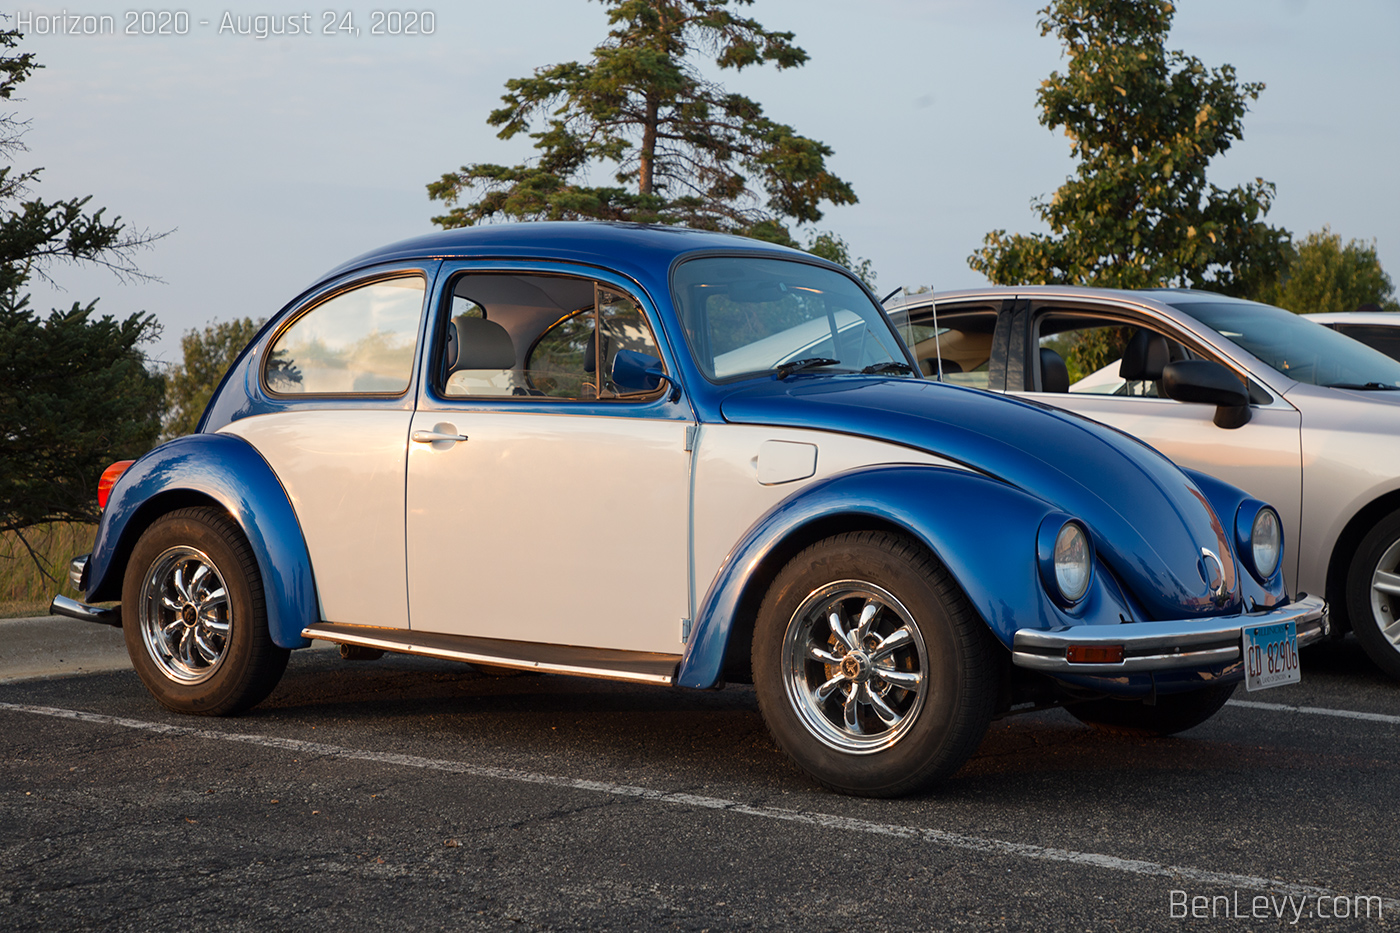 Blue and white Volkswagen Beetle